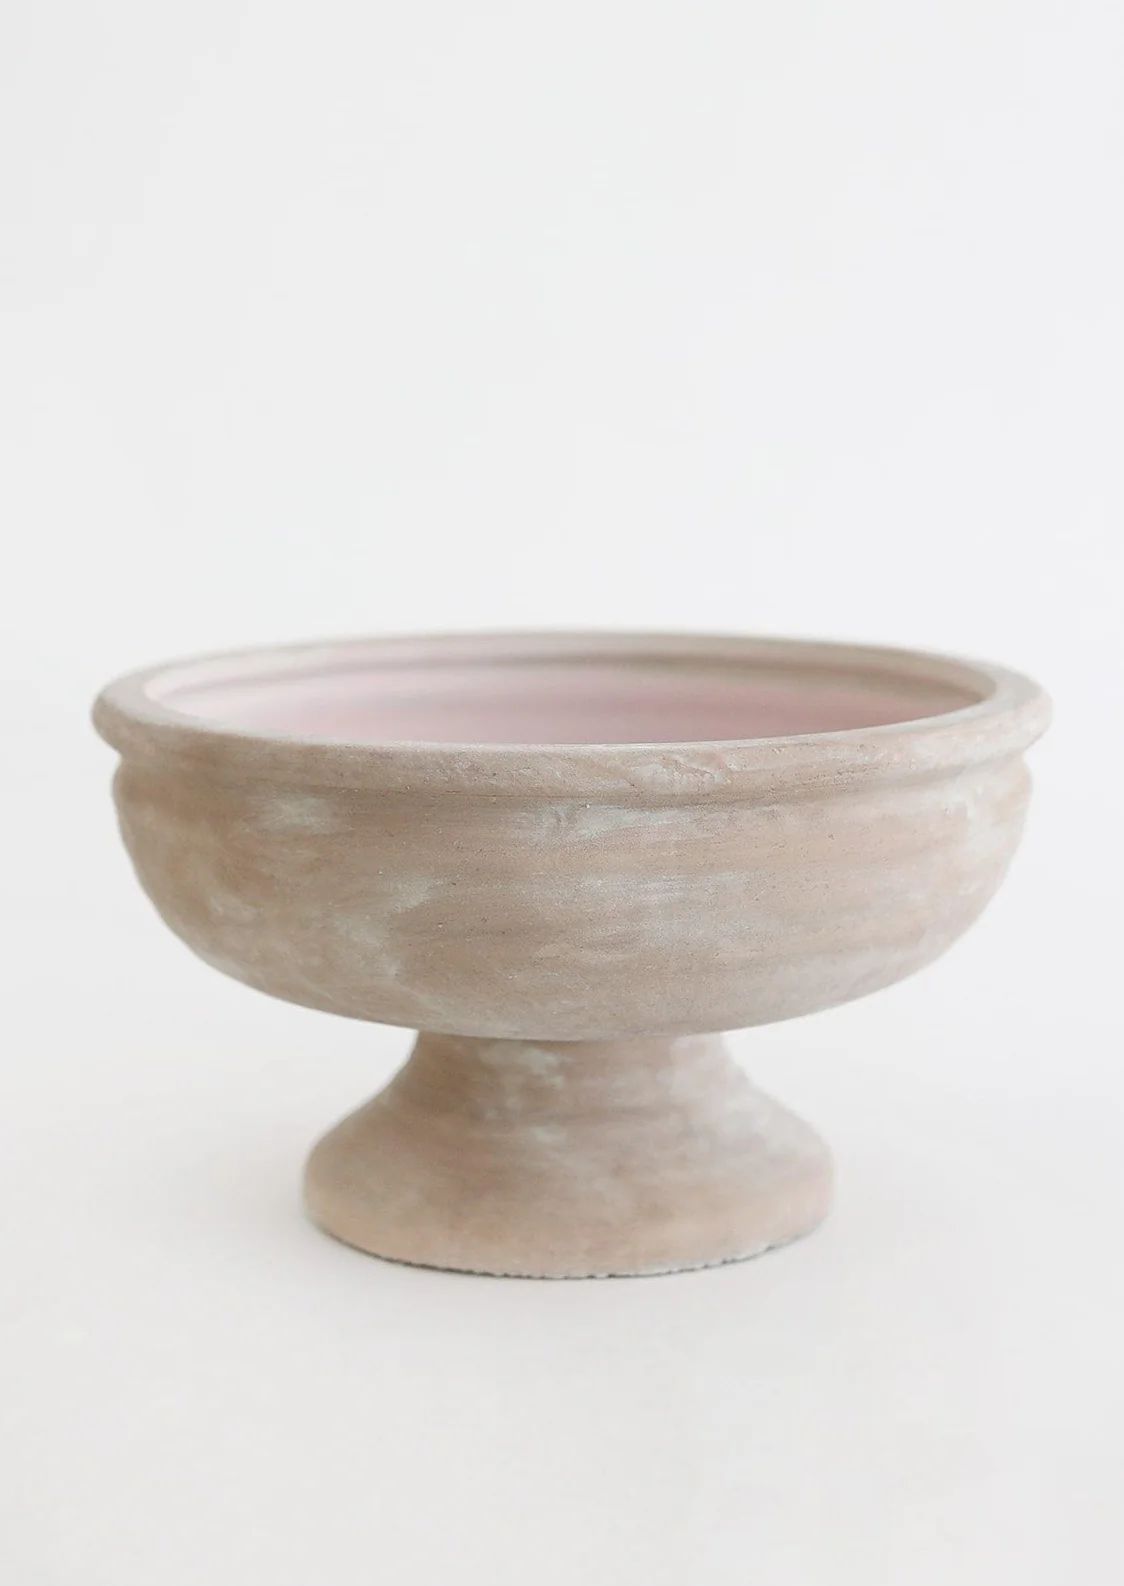 Whitewashed Compote Bowl - 6.25" Tall | Afloral (US)